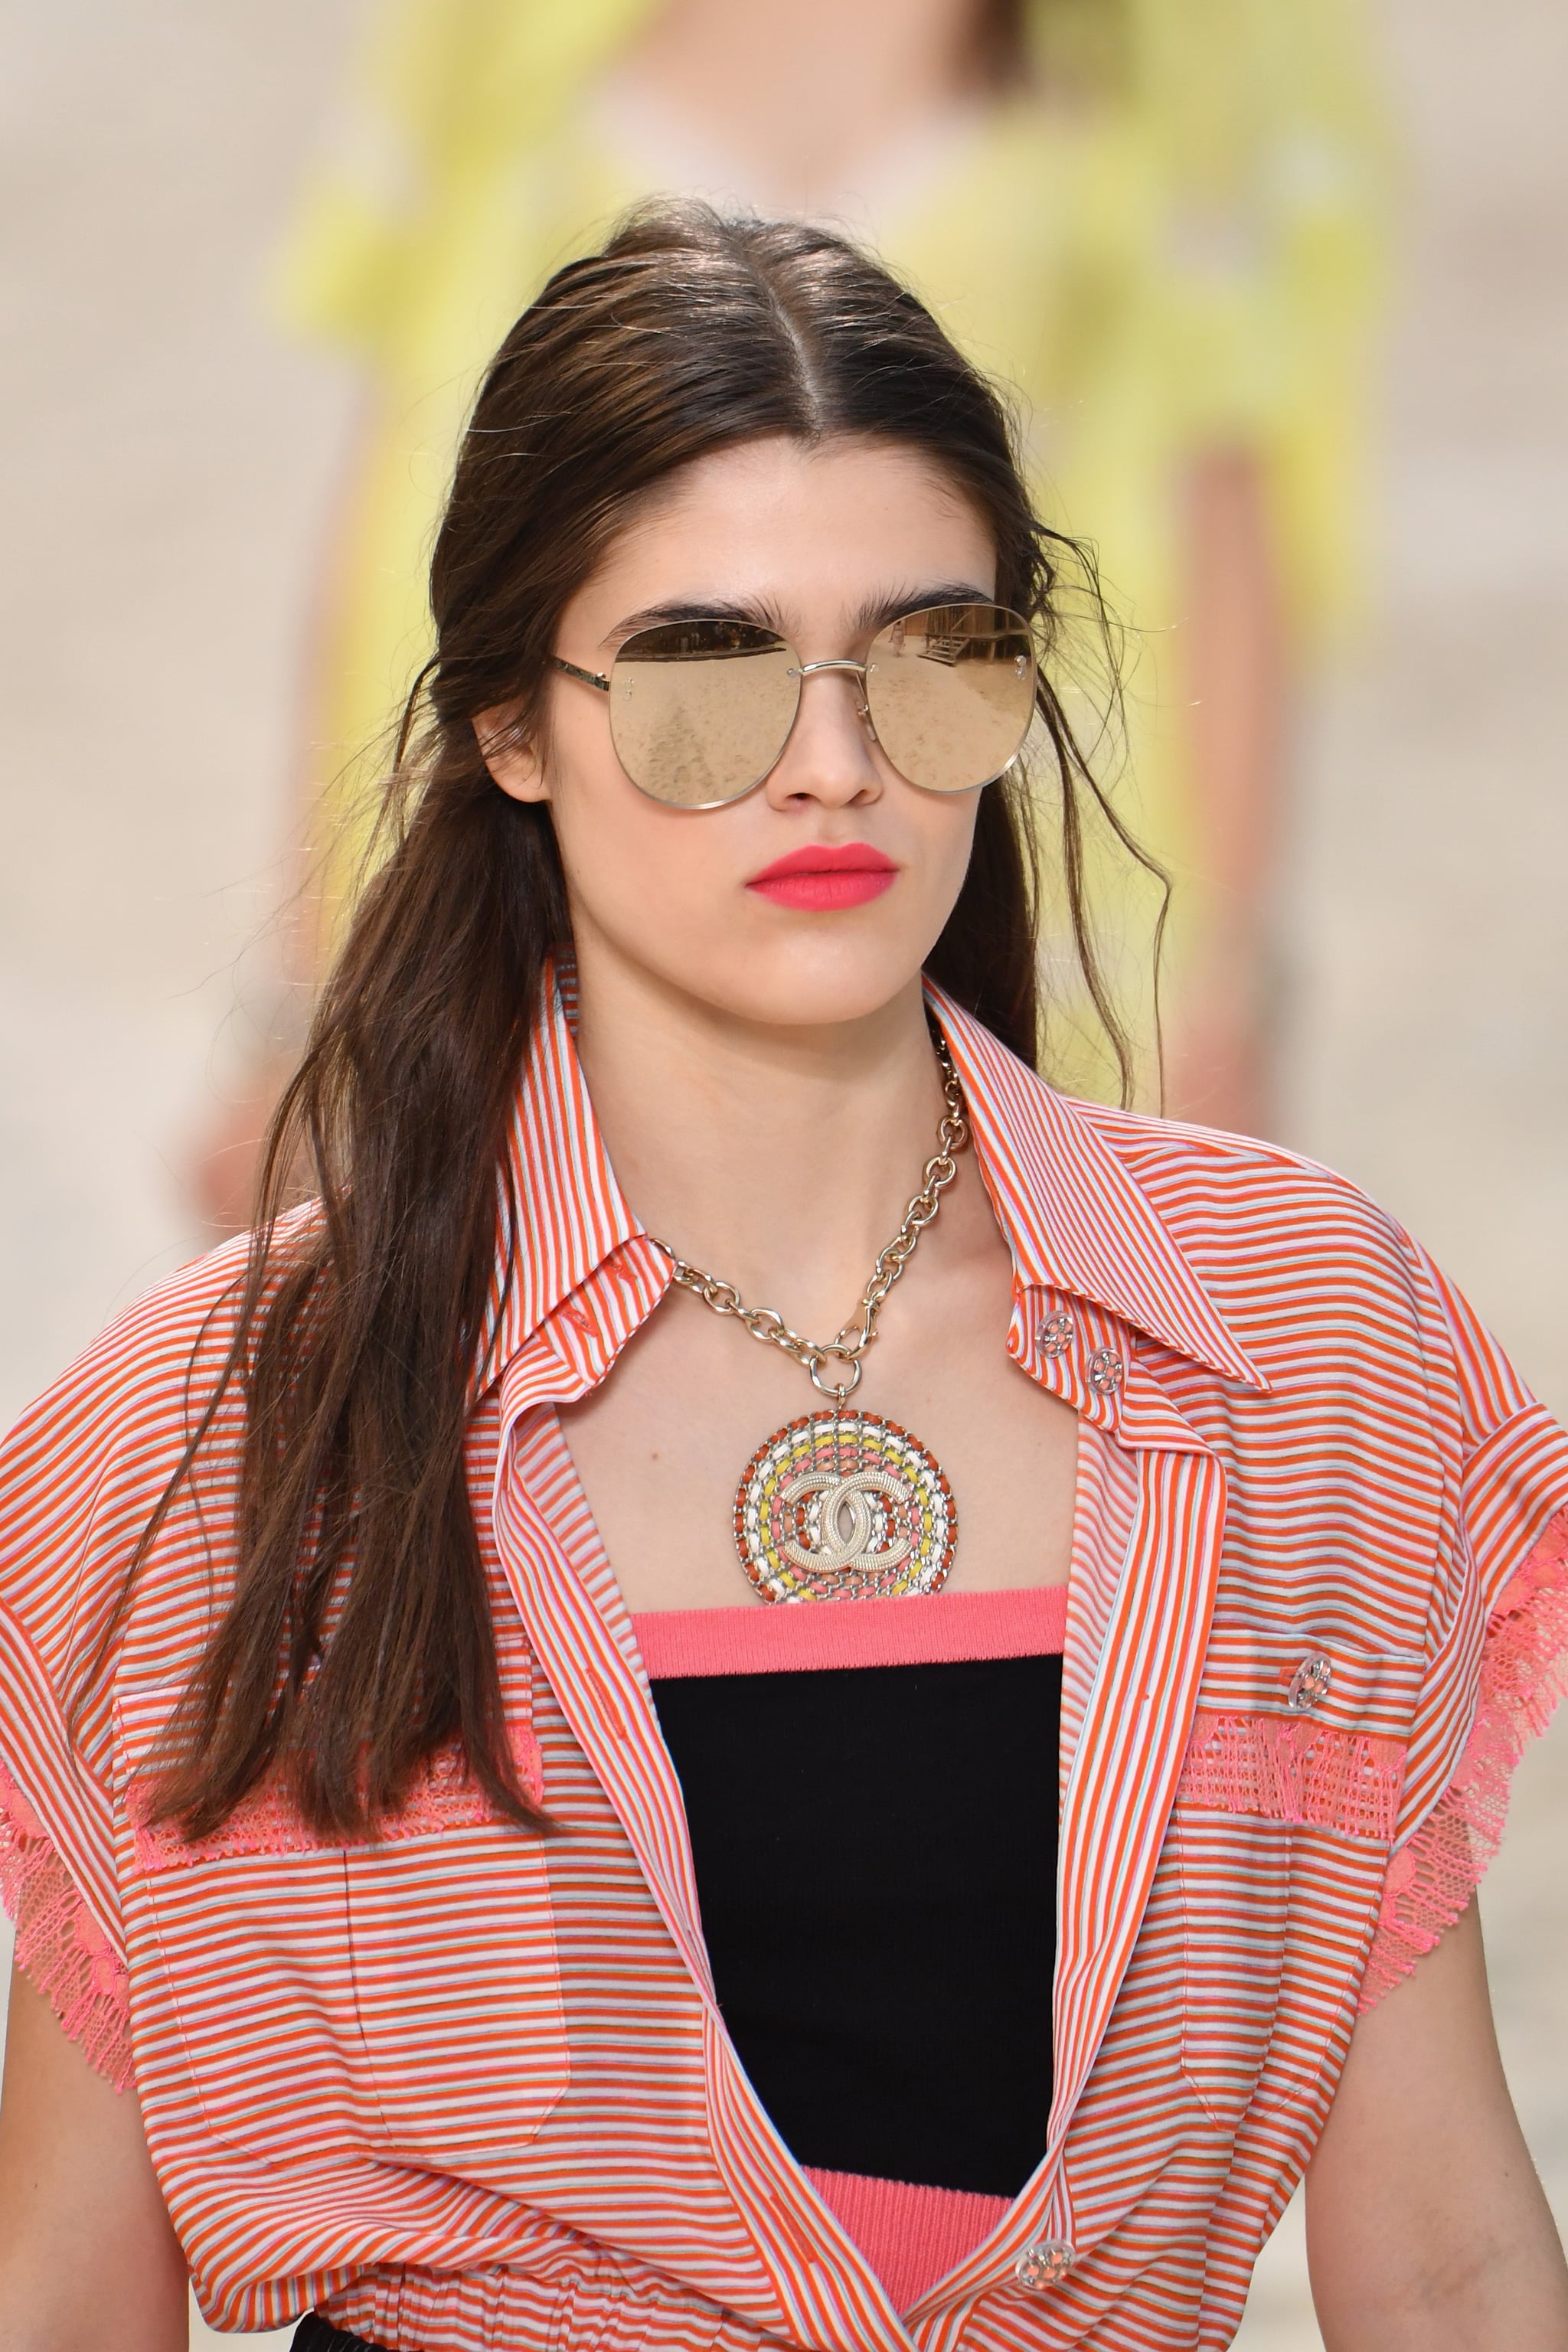 The Chanel Sunglasses  Nothing Will Excite You Like the Chanel